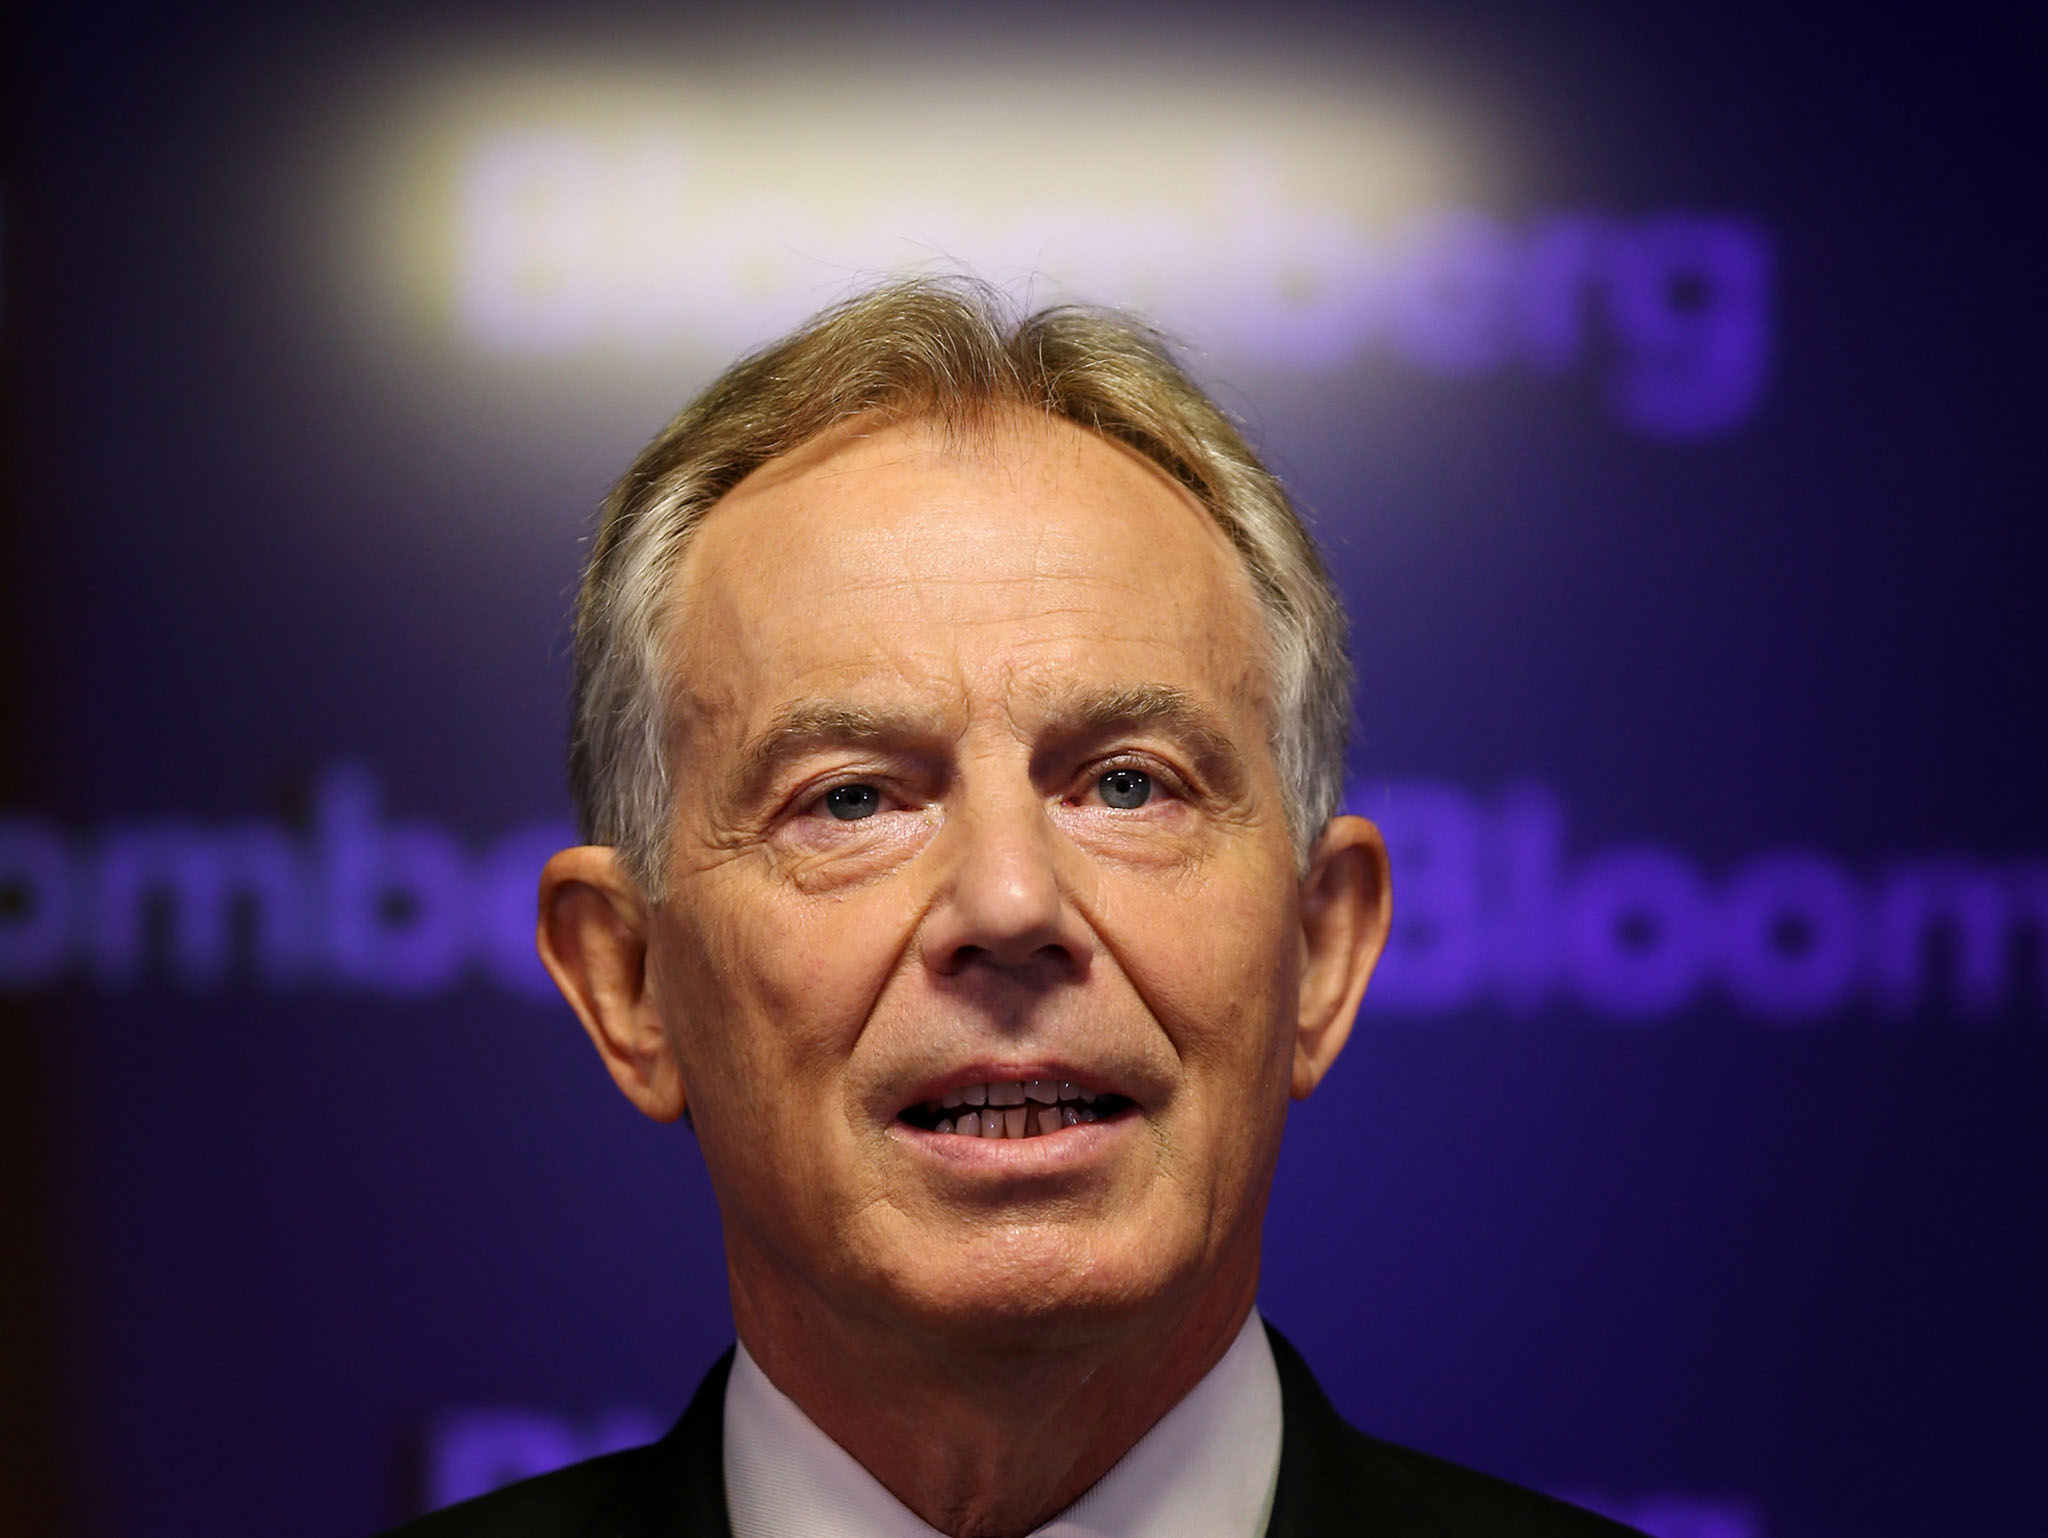 Tony Blair named top gay icon of the last 30 years